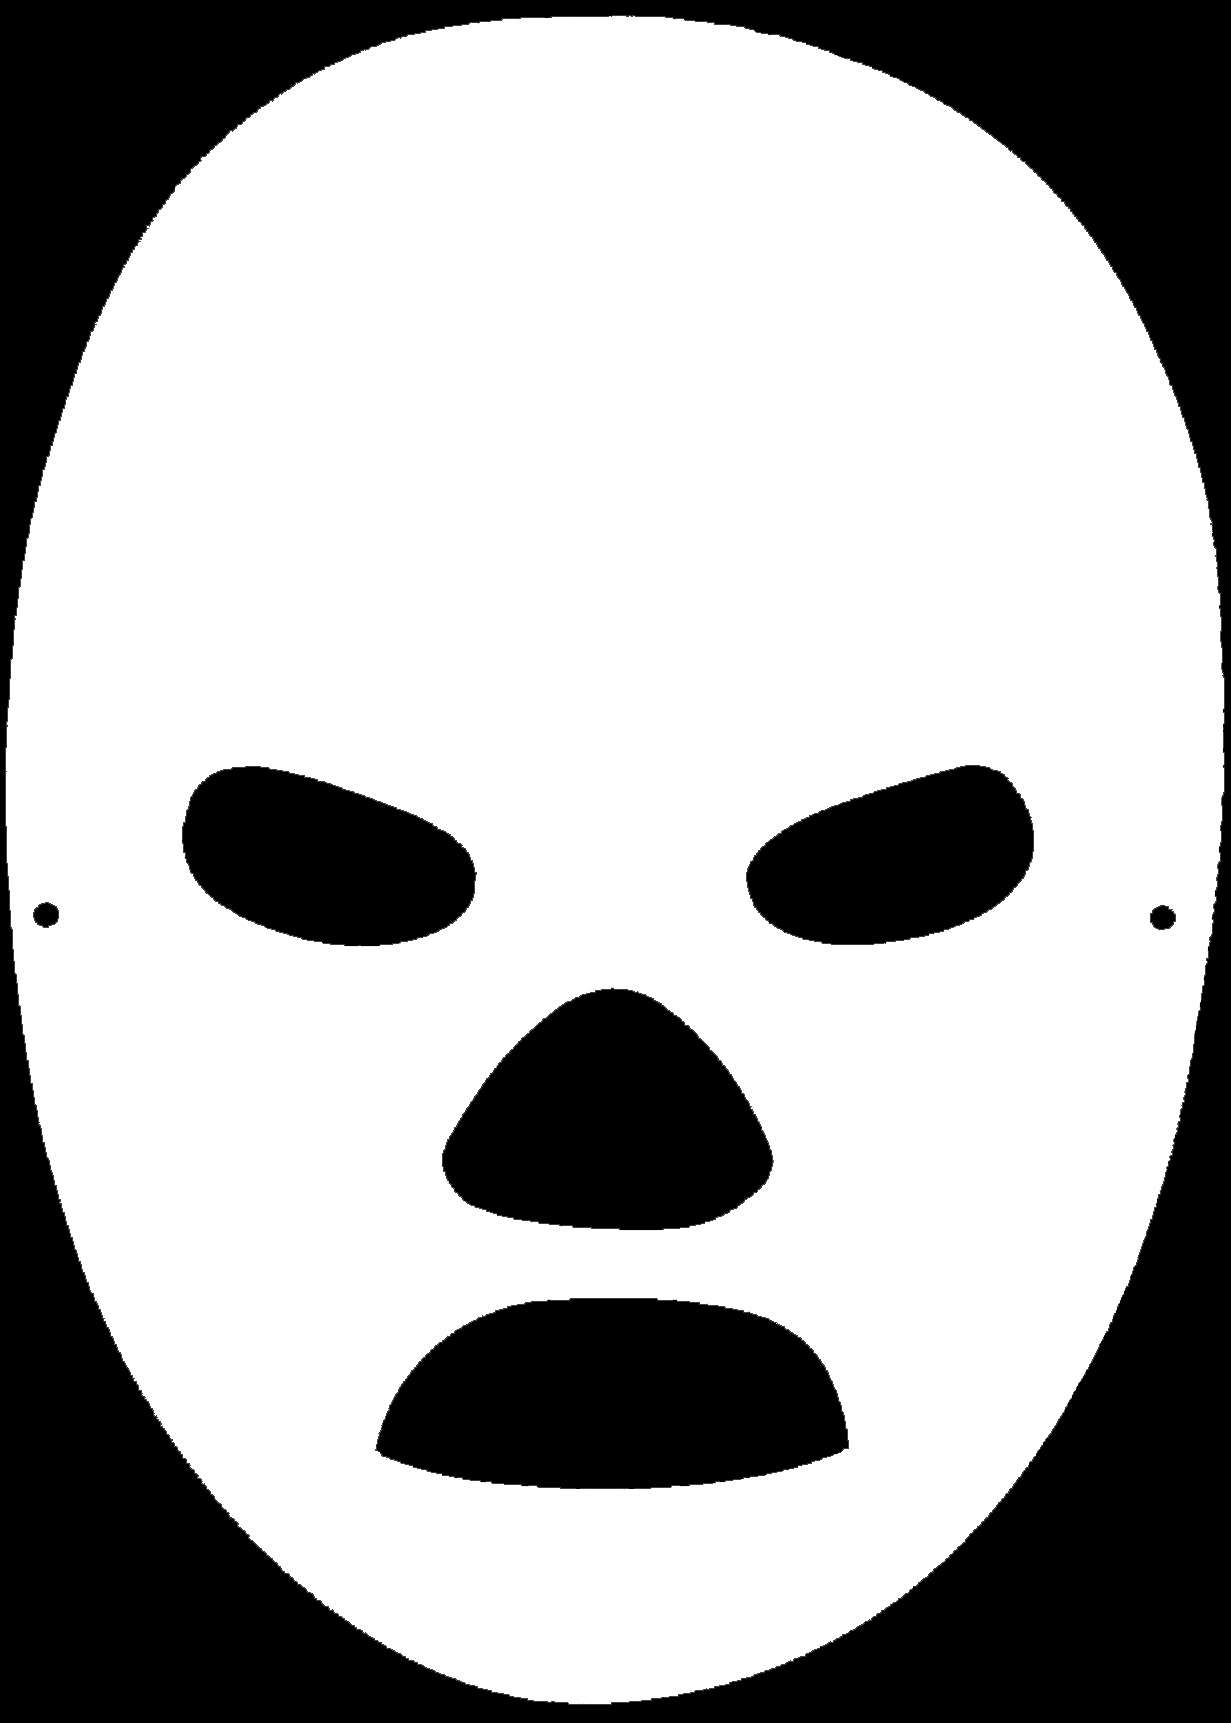 Best Photos of Blank Mask Printable Template - Full Face Mask ...